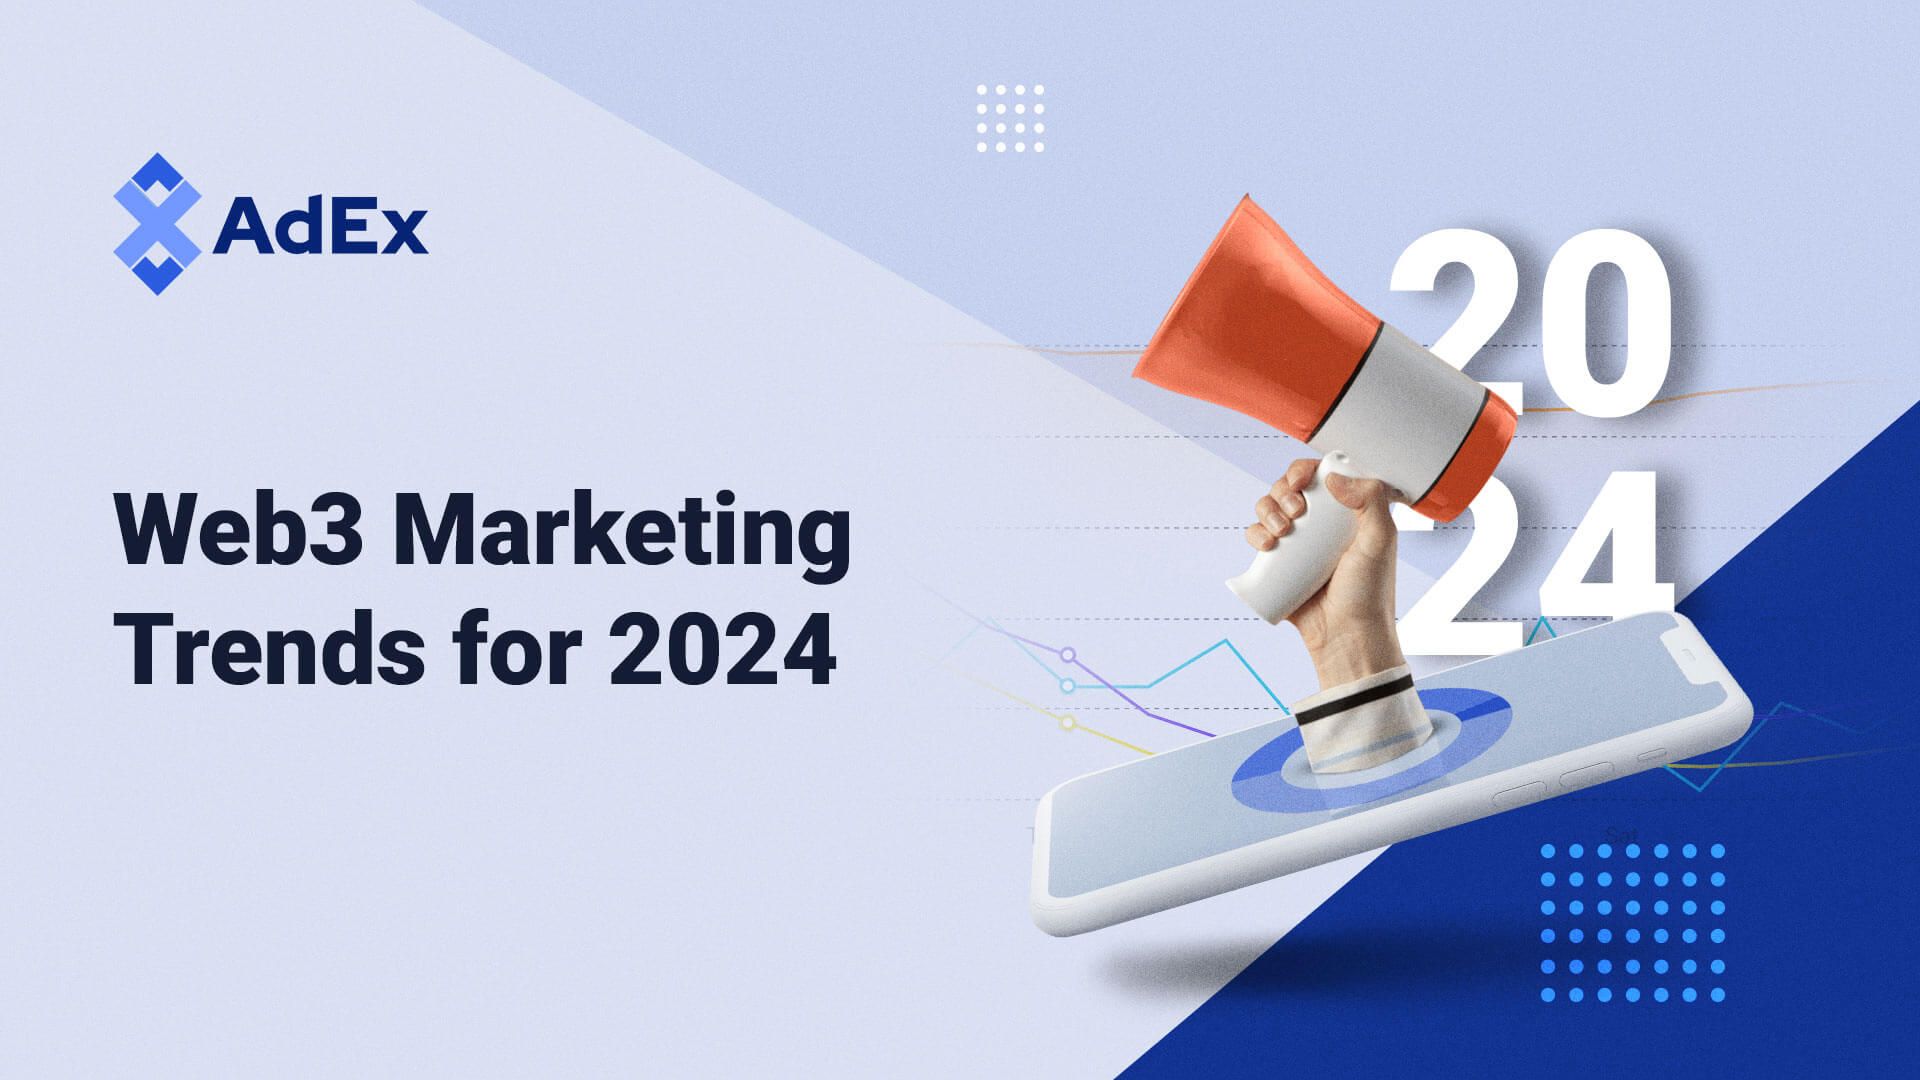 7 Web3 Marketing Trends for 2024